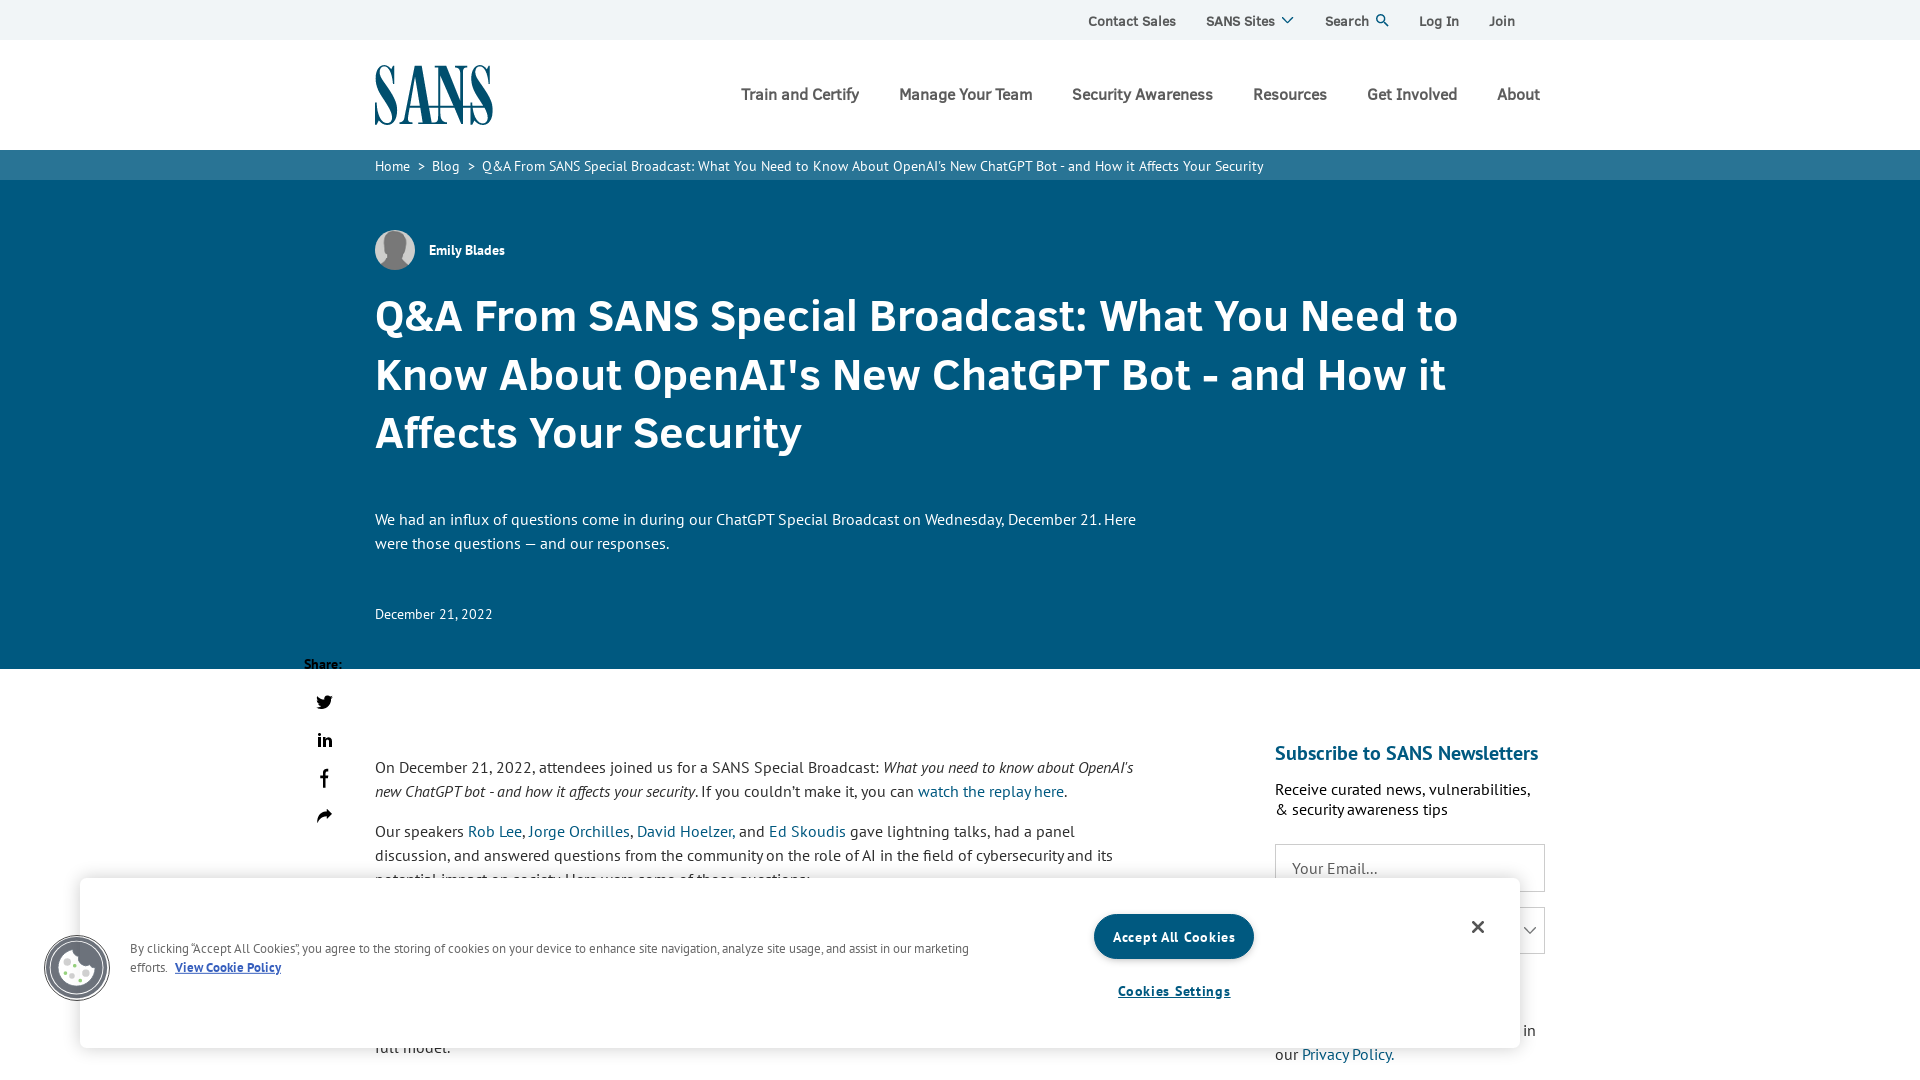 Q&A From SANS Special Broadcast: What You Need to Know About OpenAI's New ChatGPT Bot - and How it Affects Your Security